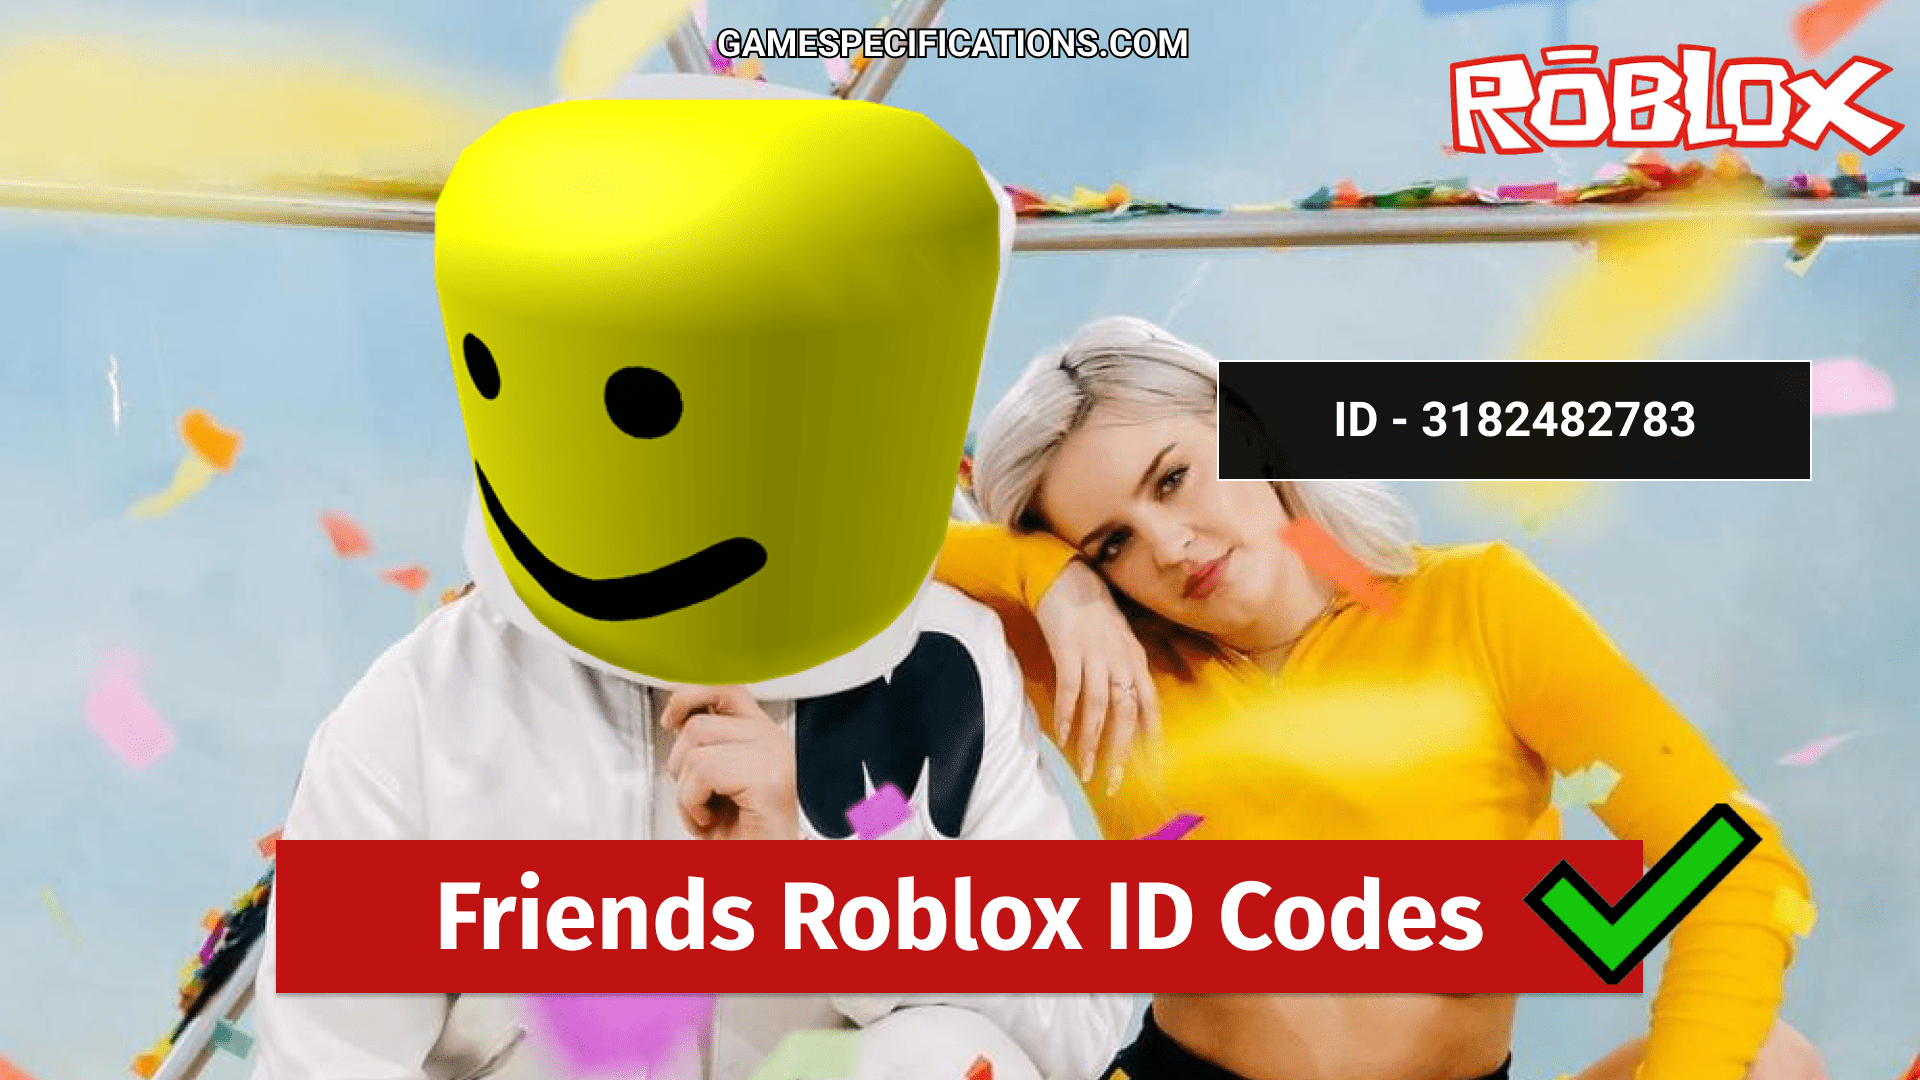 Friends Roblox Id Codes From Marshmello 2021 Game Specifications - roblox code for female raps